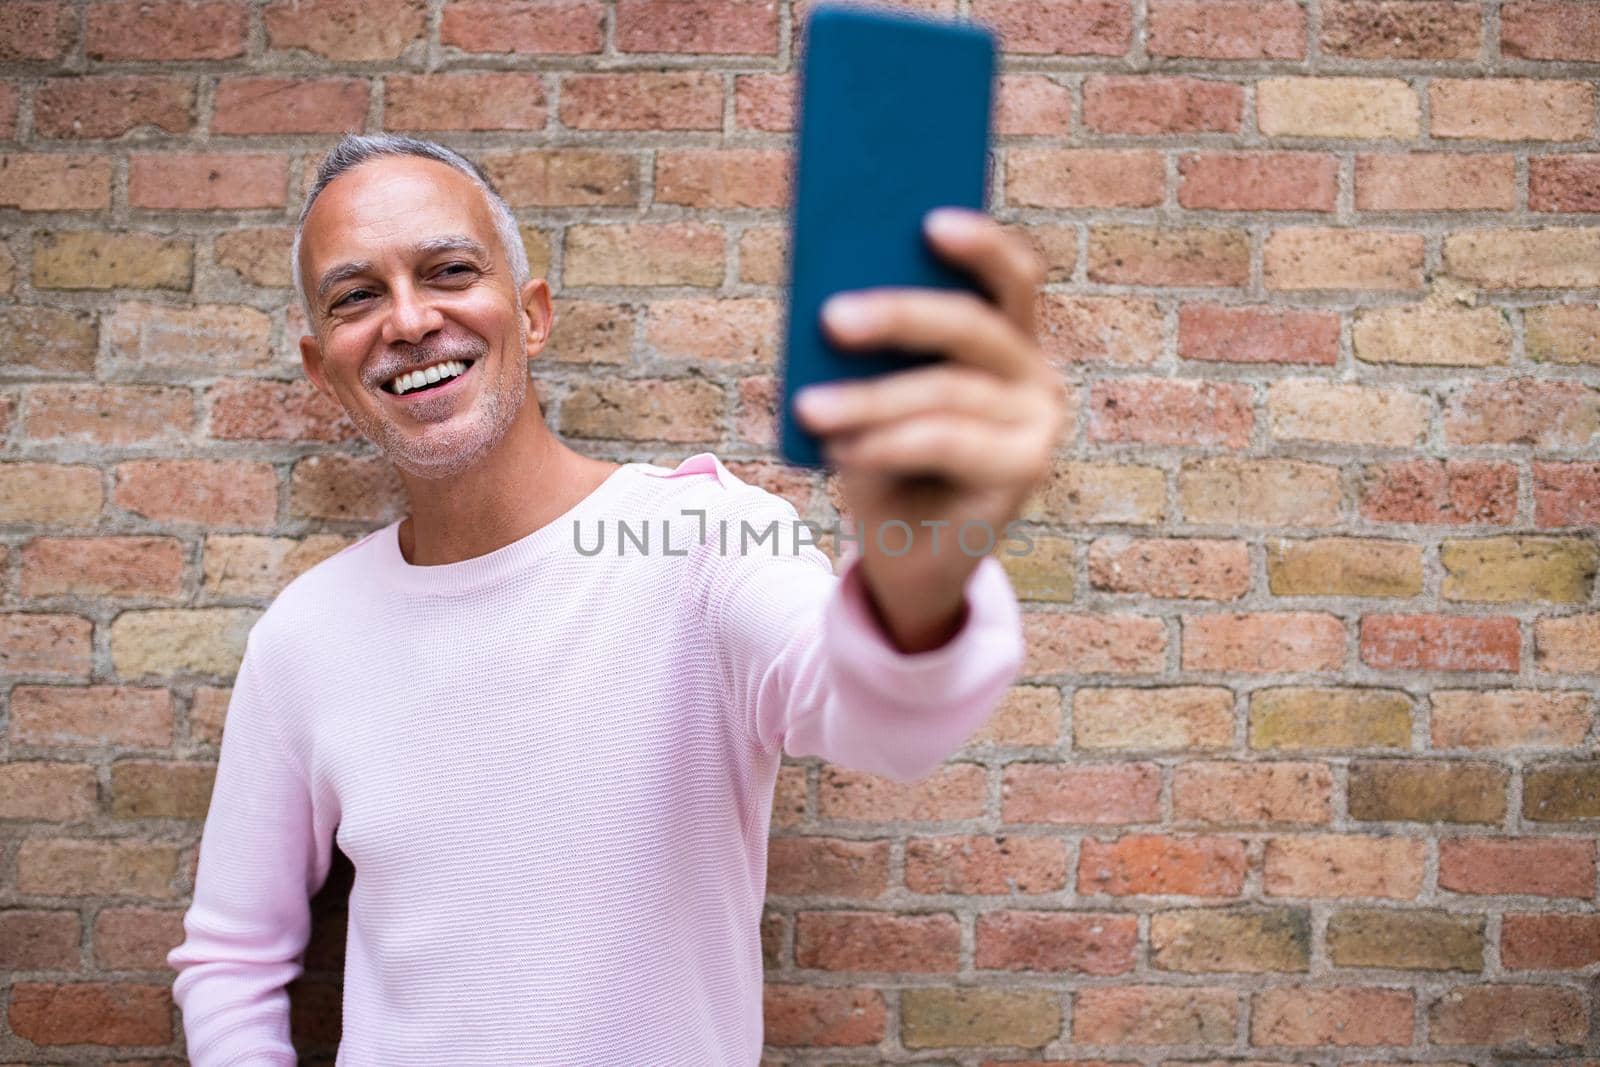 Smiling caucasian adult man taking selfie. Orange brick wall background. Copy space. Technology and lifestyle concept.